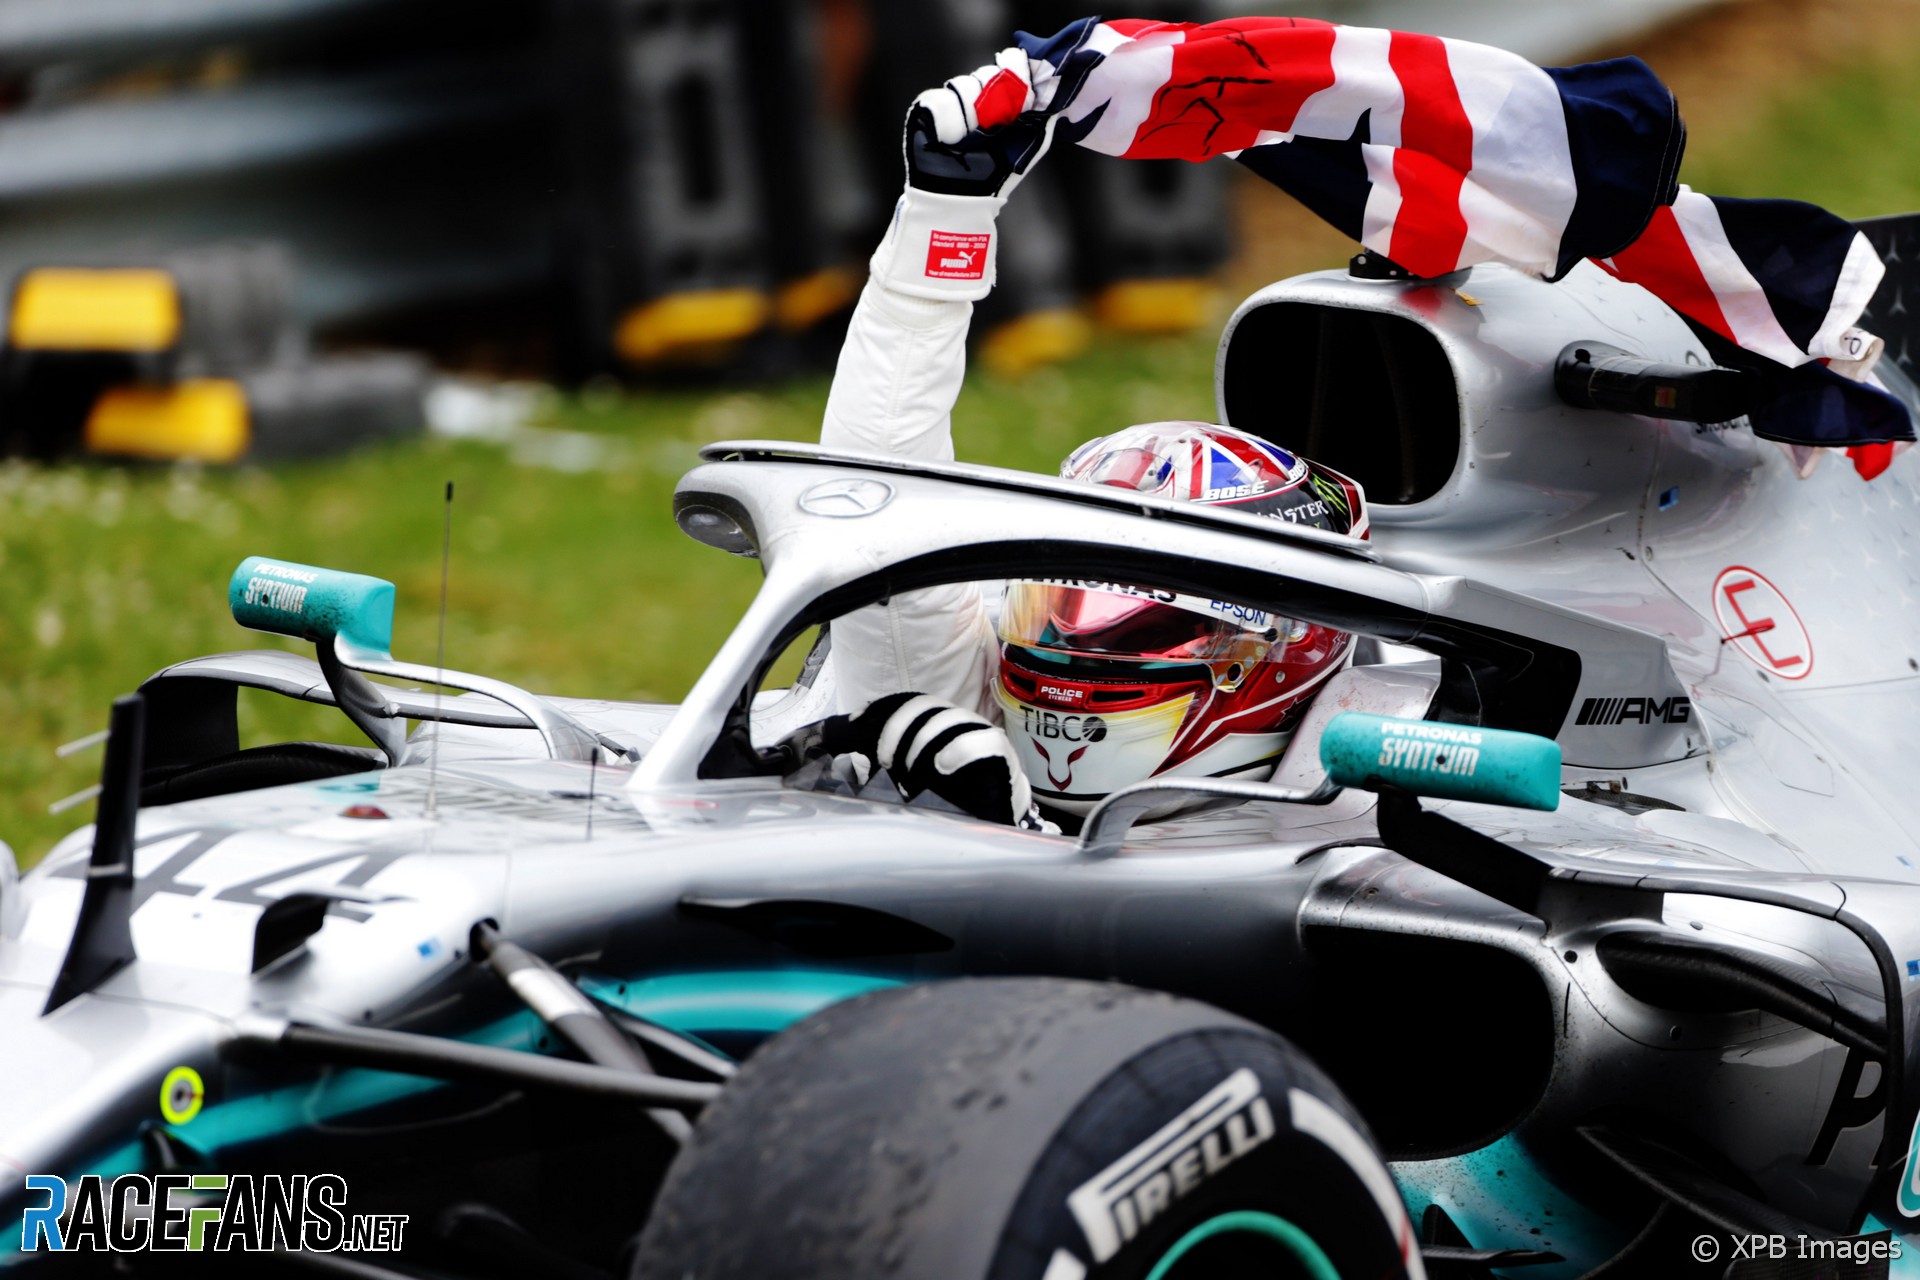 Hamilton and Formula 1 at their best in Silverstone spectacular